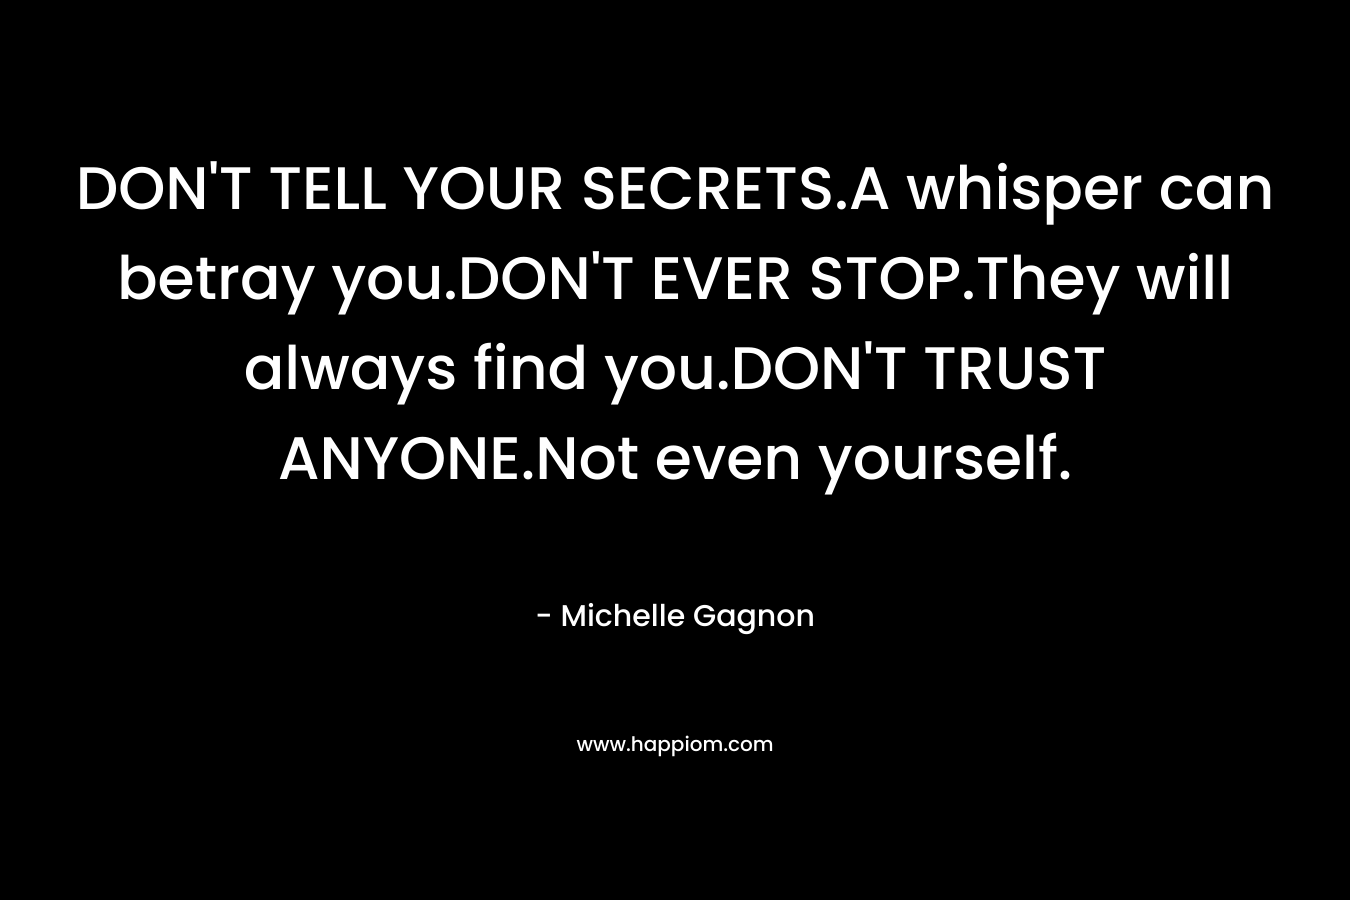 DON'T TELL YOUR SECRETS.A whisper can betray you.DON'T EVER STOP.They will always find you.DON'T TRUST ANYONE.Not even yourself.